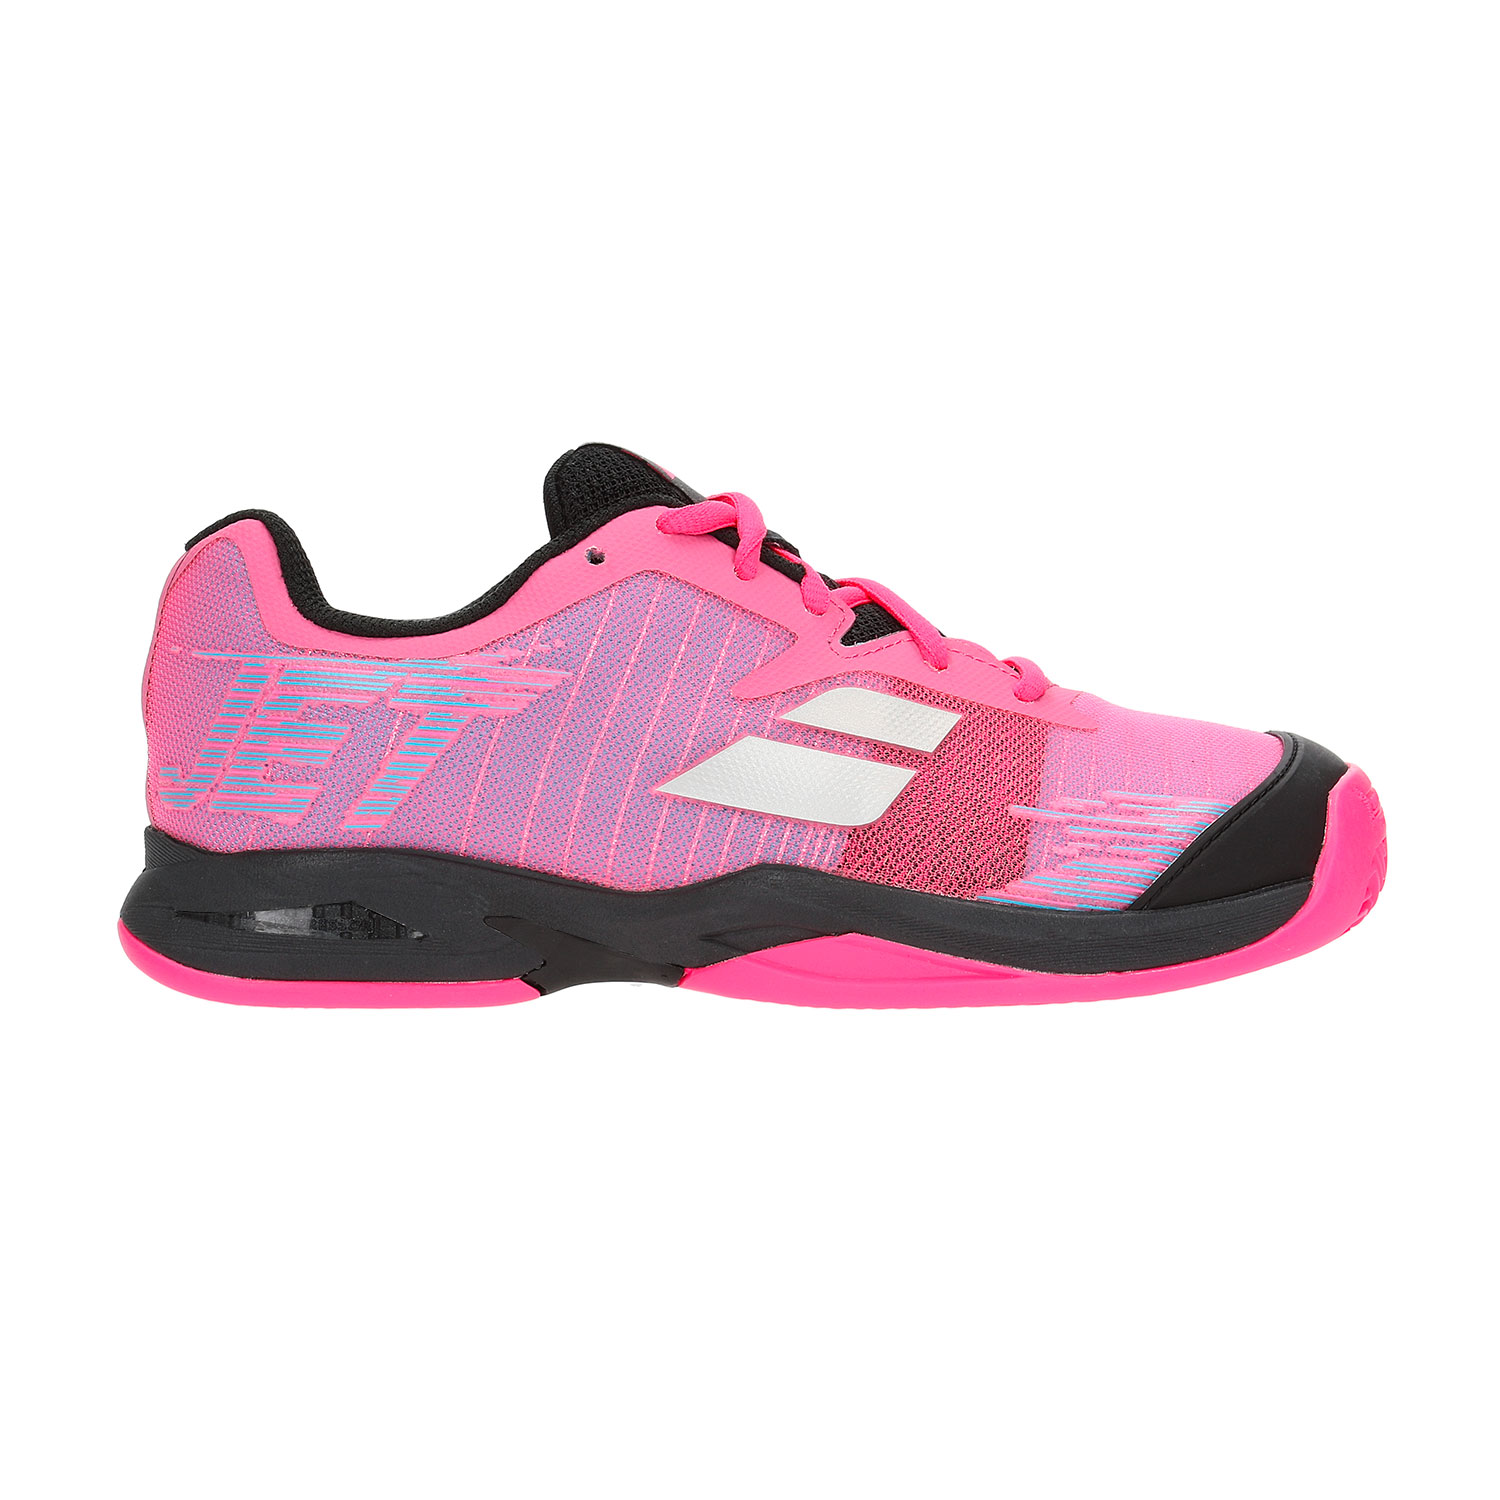 Babolat Jet Clay Junior Tennis Shoes 